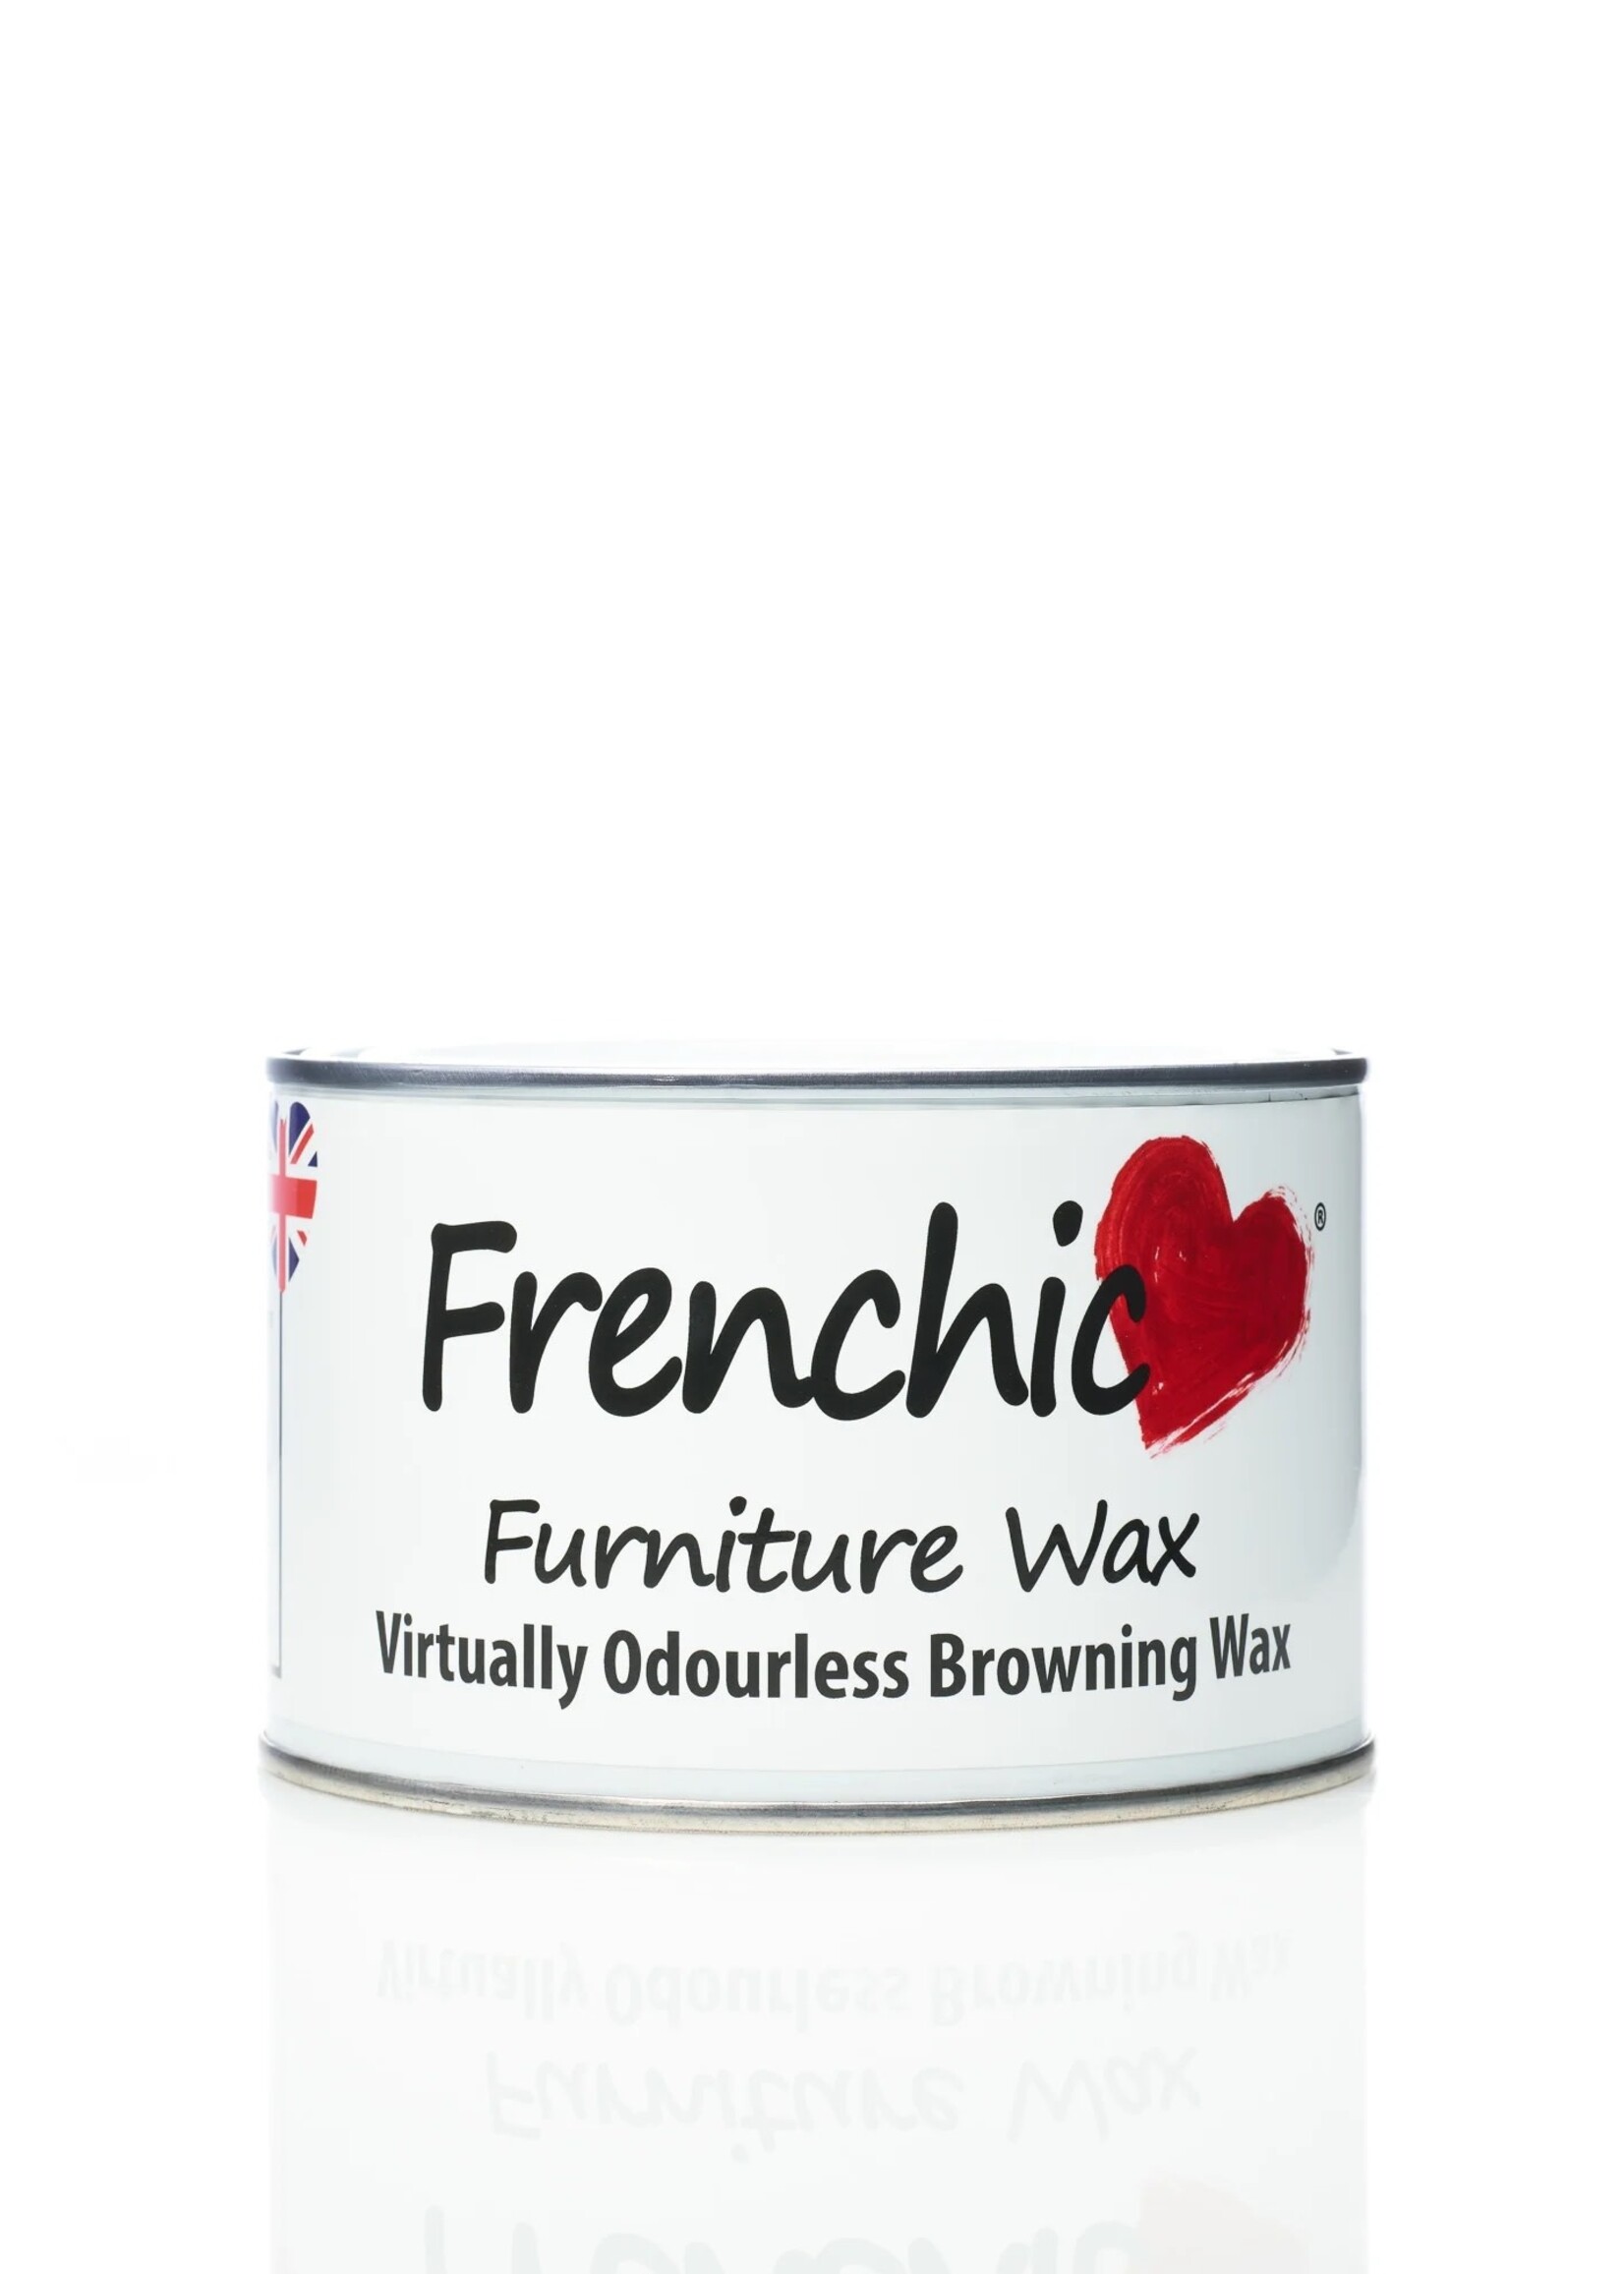 Frenchic Paint Frenchic Browning Wax